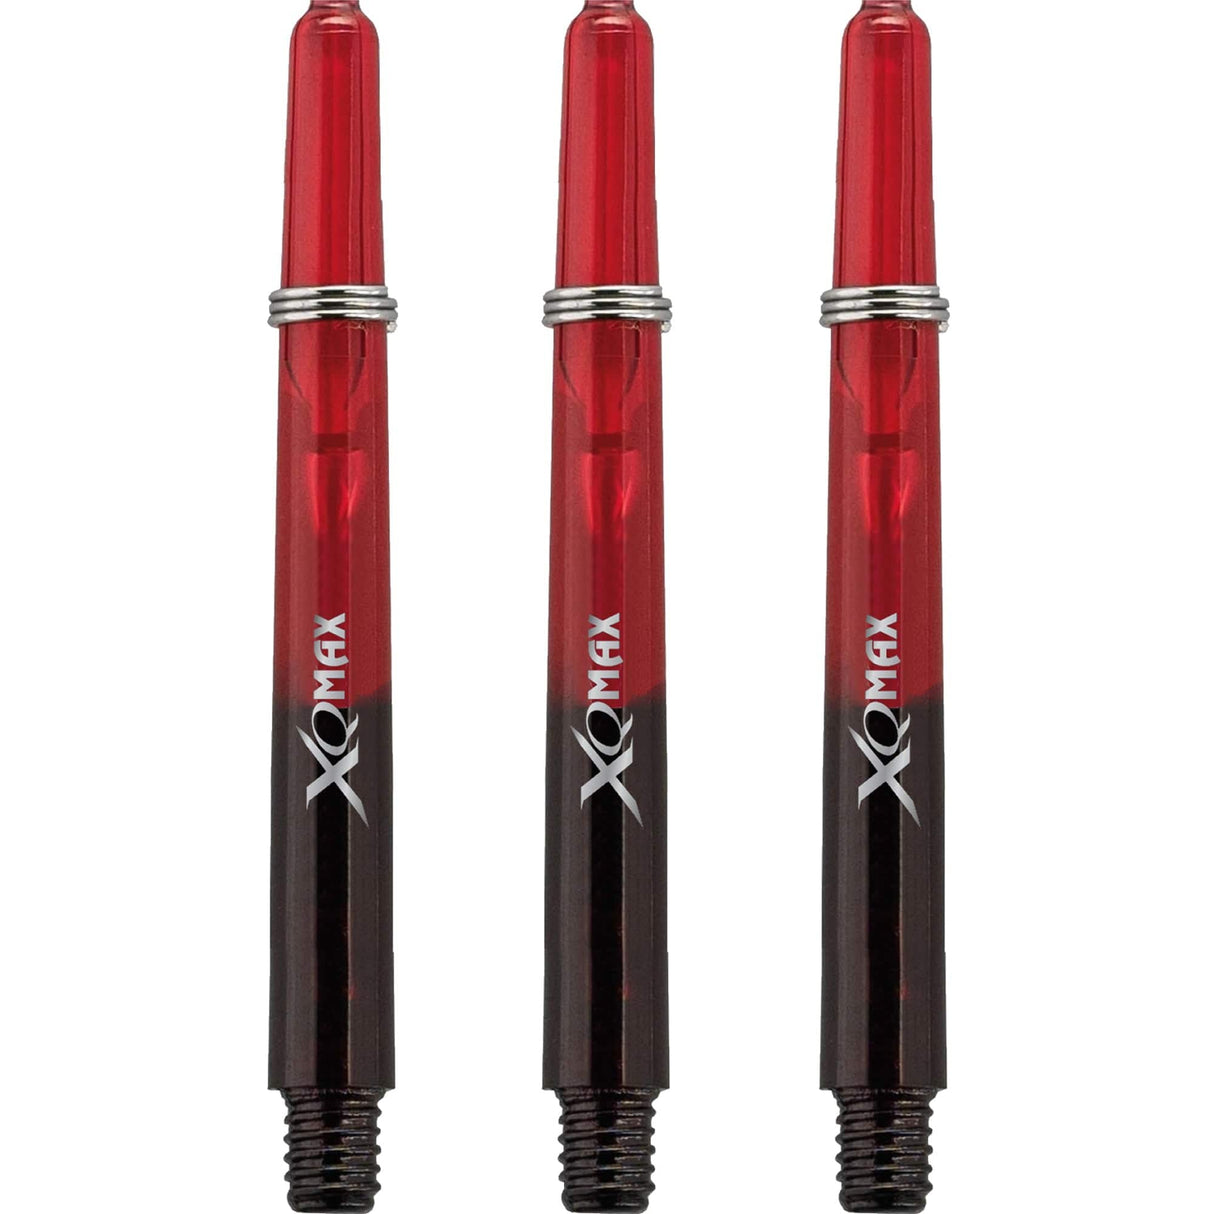 XQMax Gradient Polycarbonate Dart Shafts - with Logo - includes Springs - Black & Red Medium